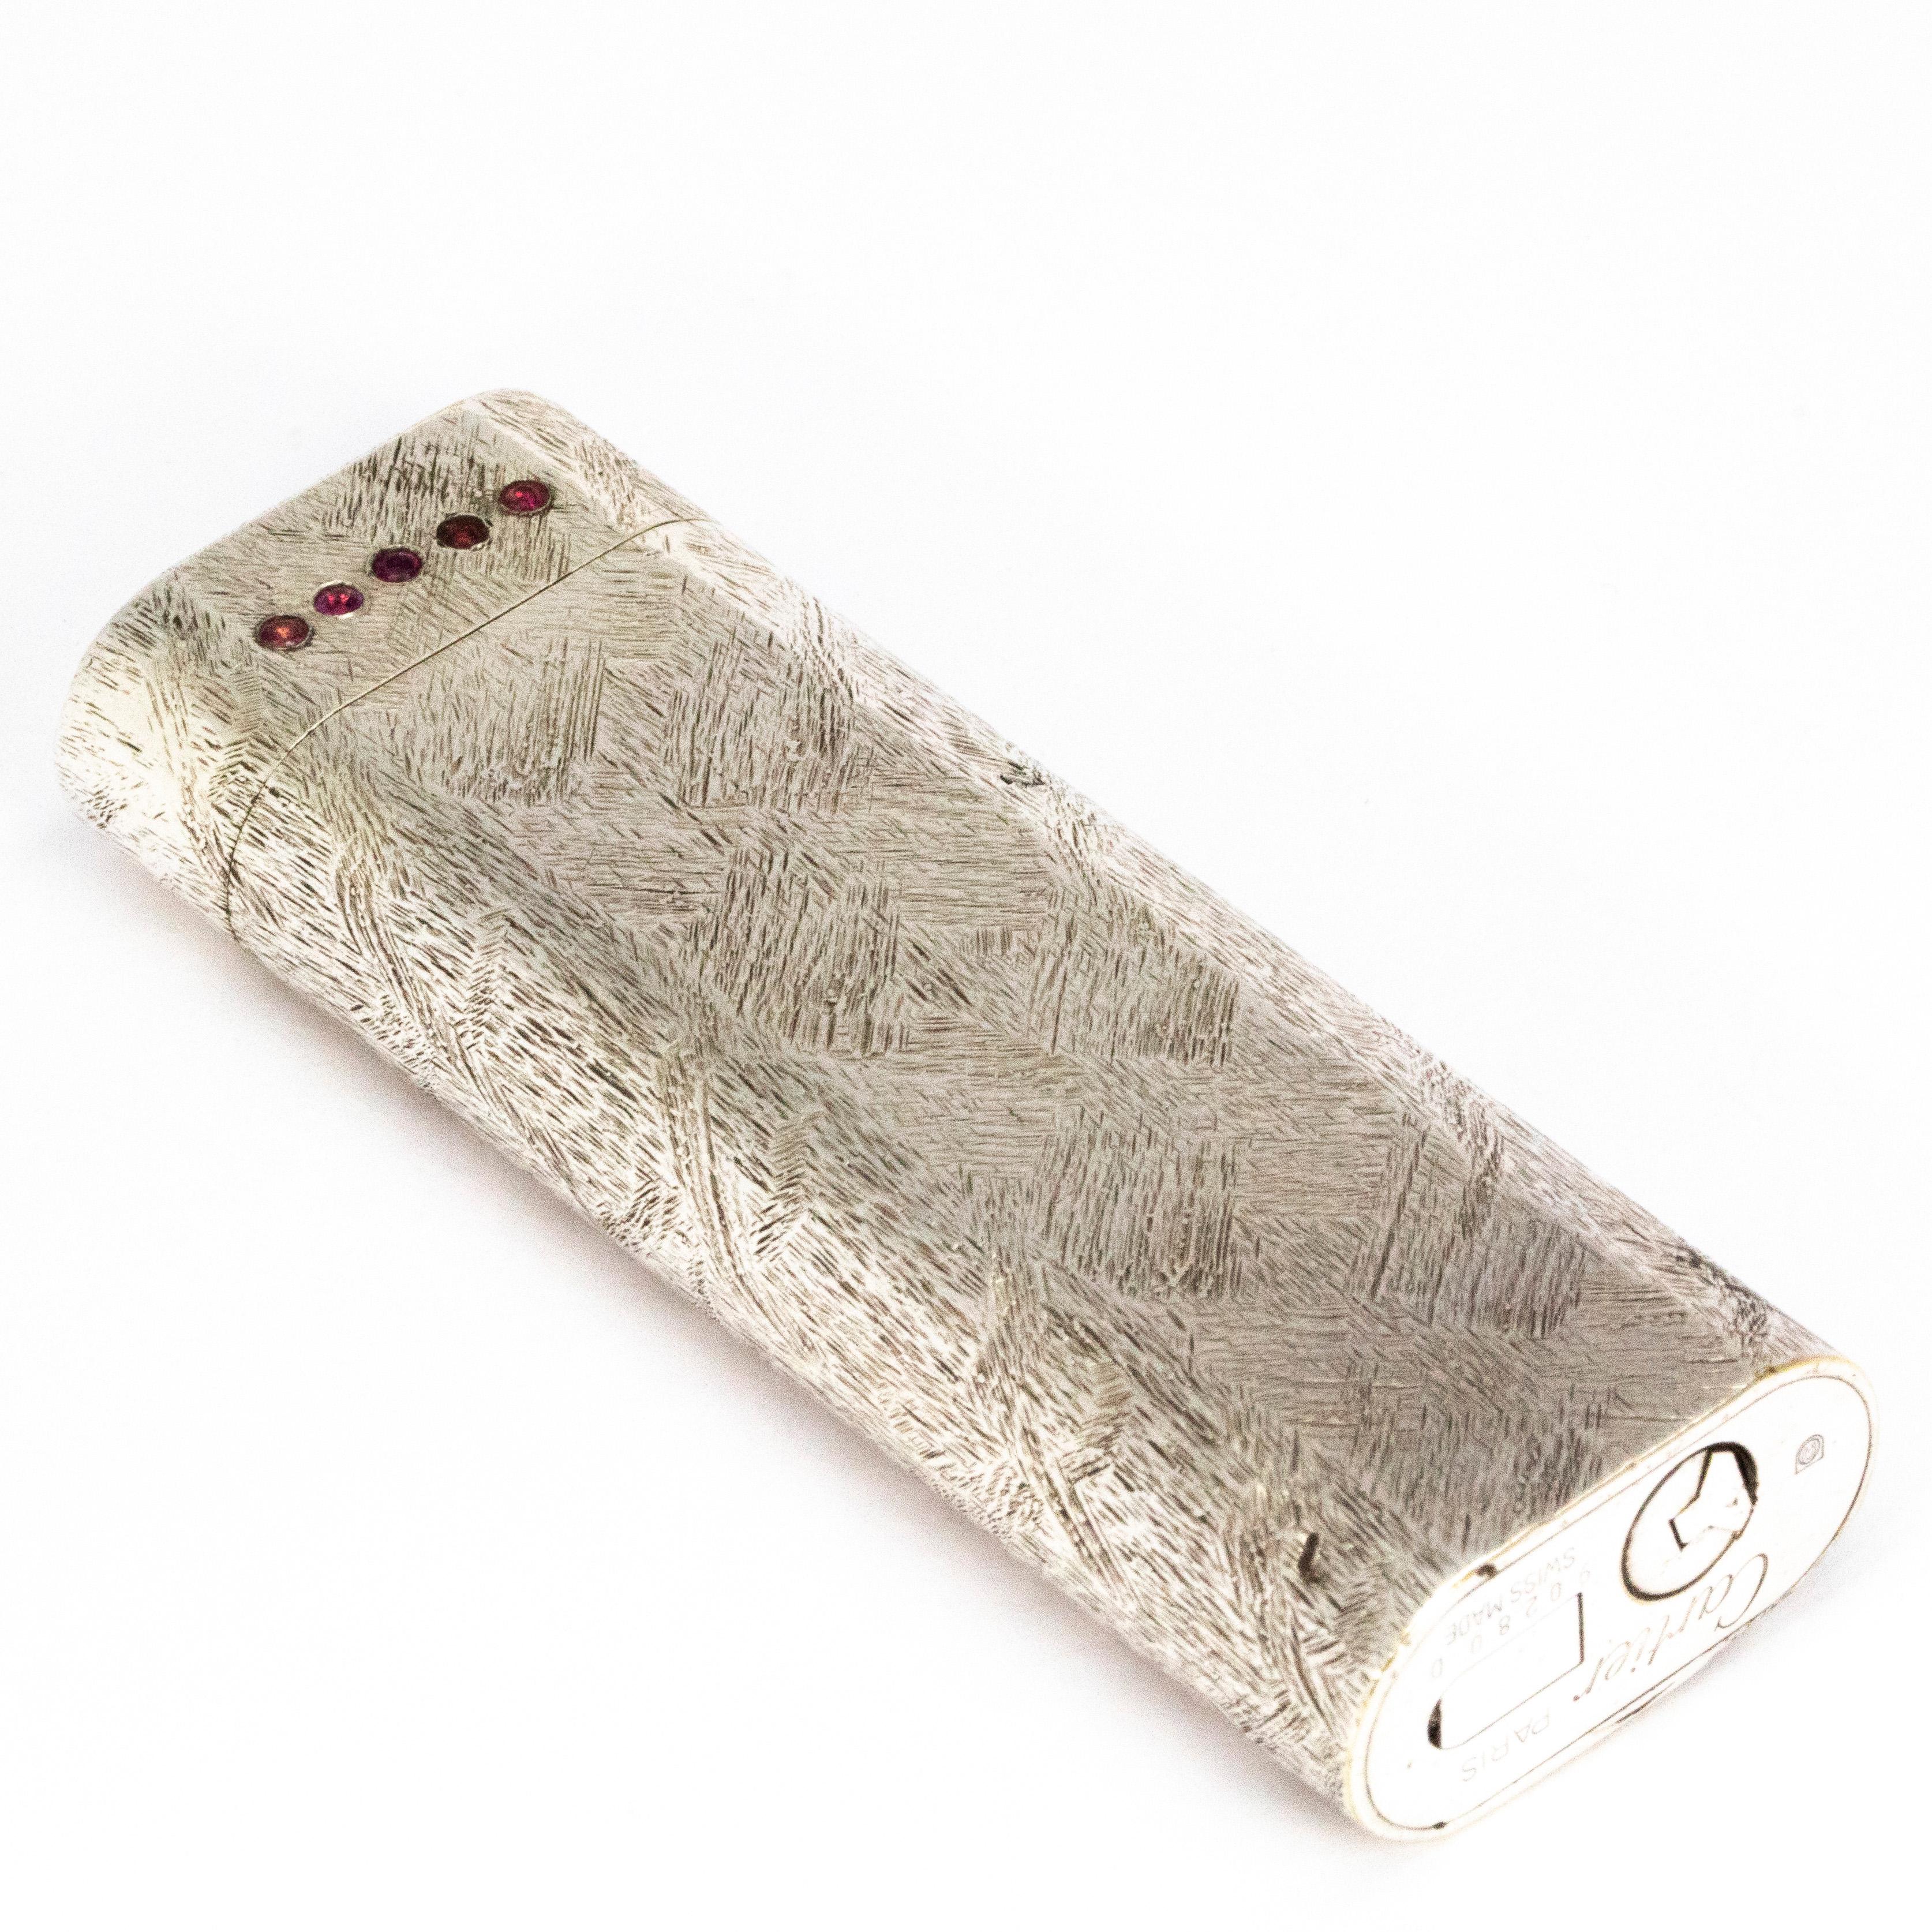 This fancy lighter is modelled in silver and has stylish detail engraved all around it. In the lid there are five rubies set in a line. The red rubies complement the engraved silver beautifully. The Cartier signature can be found on the under side